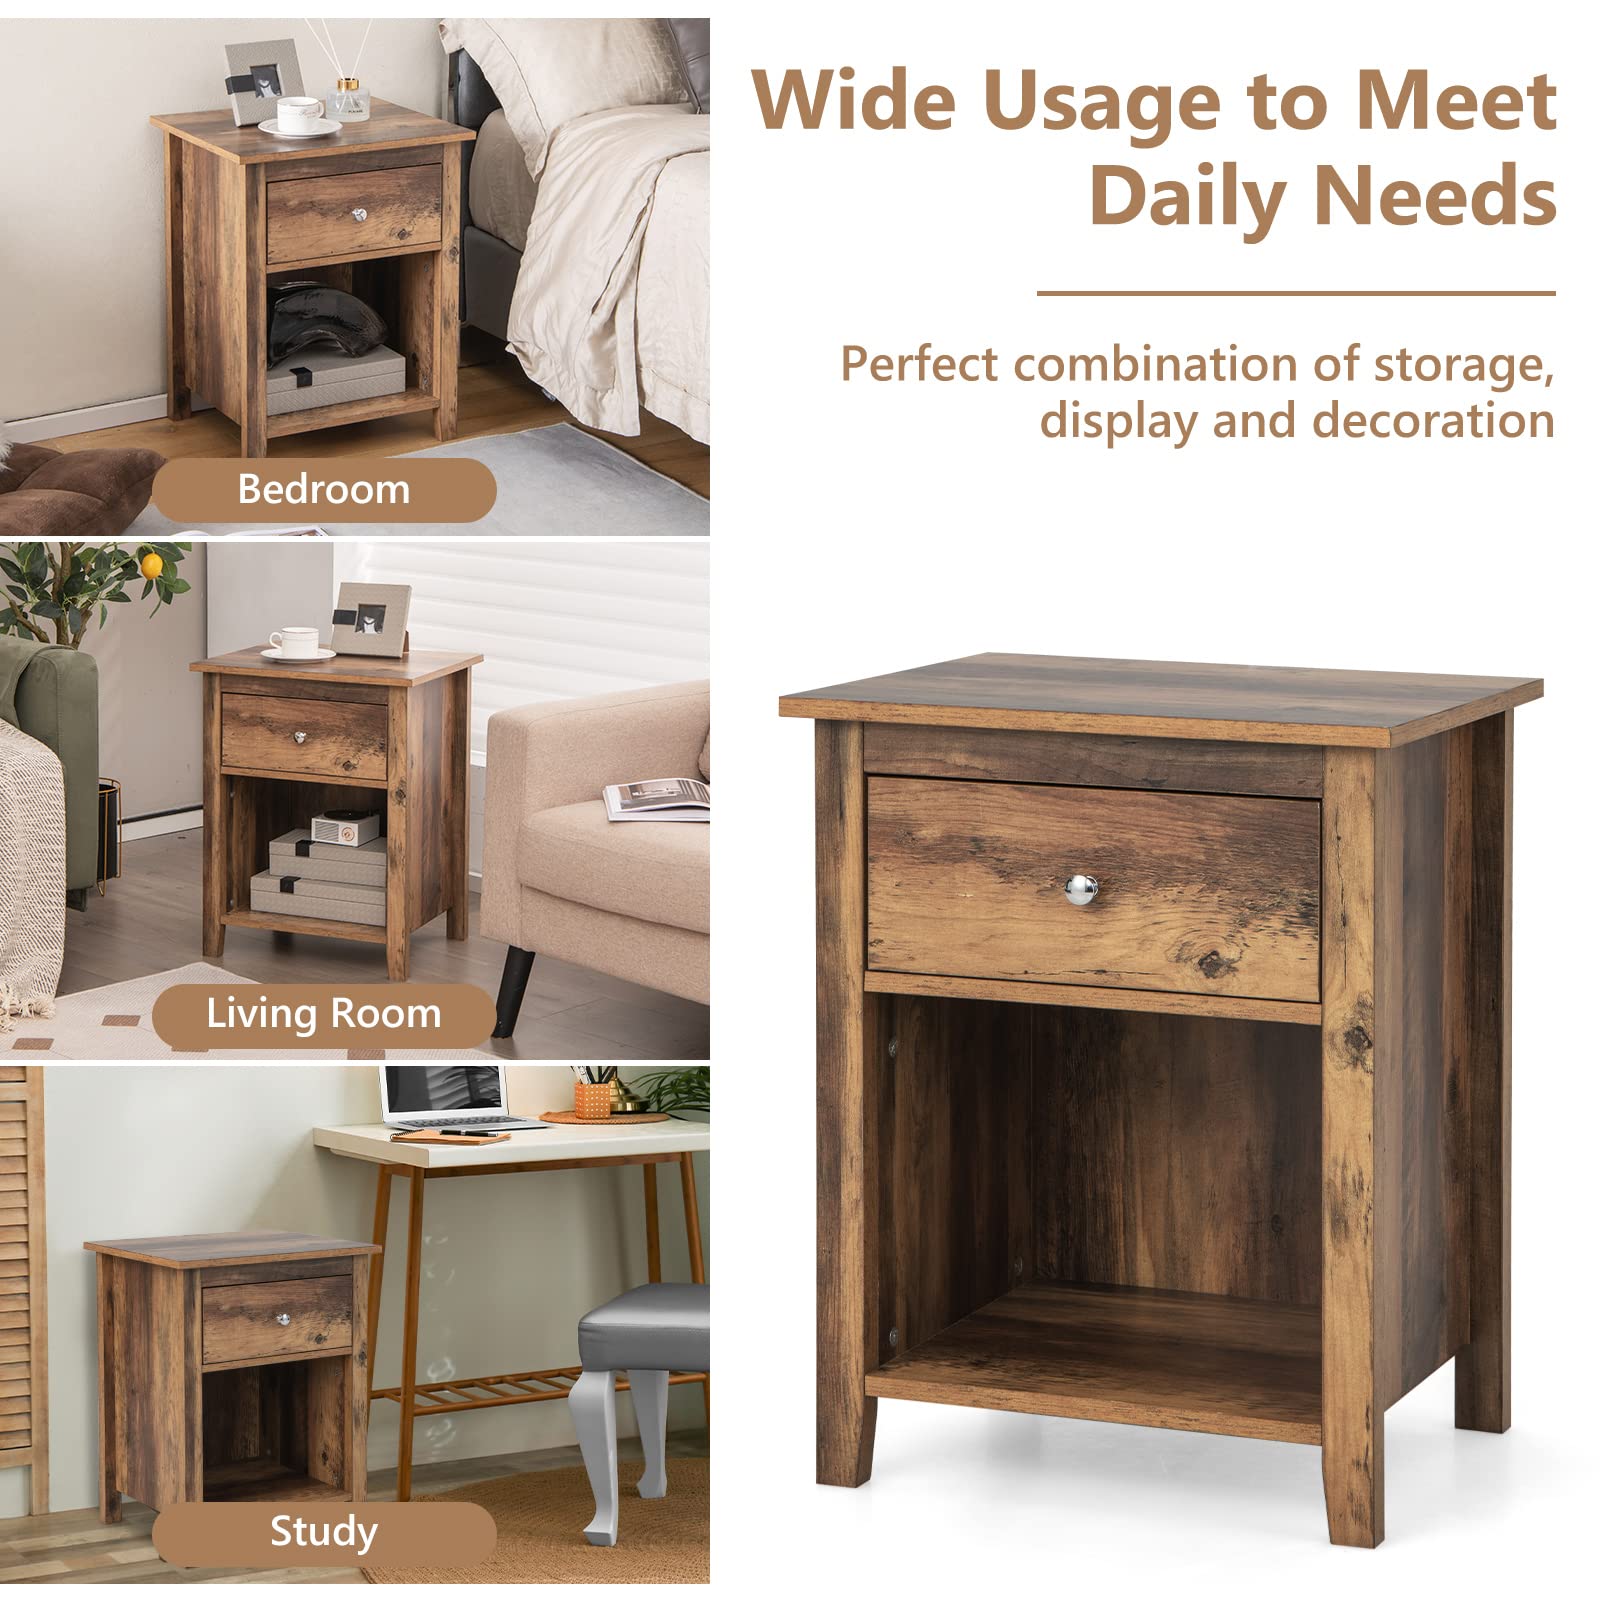 Giantex Nightstand with Storage Drawers and Open Shelf, Rustic Vintage Bedside Table